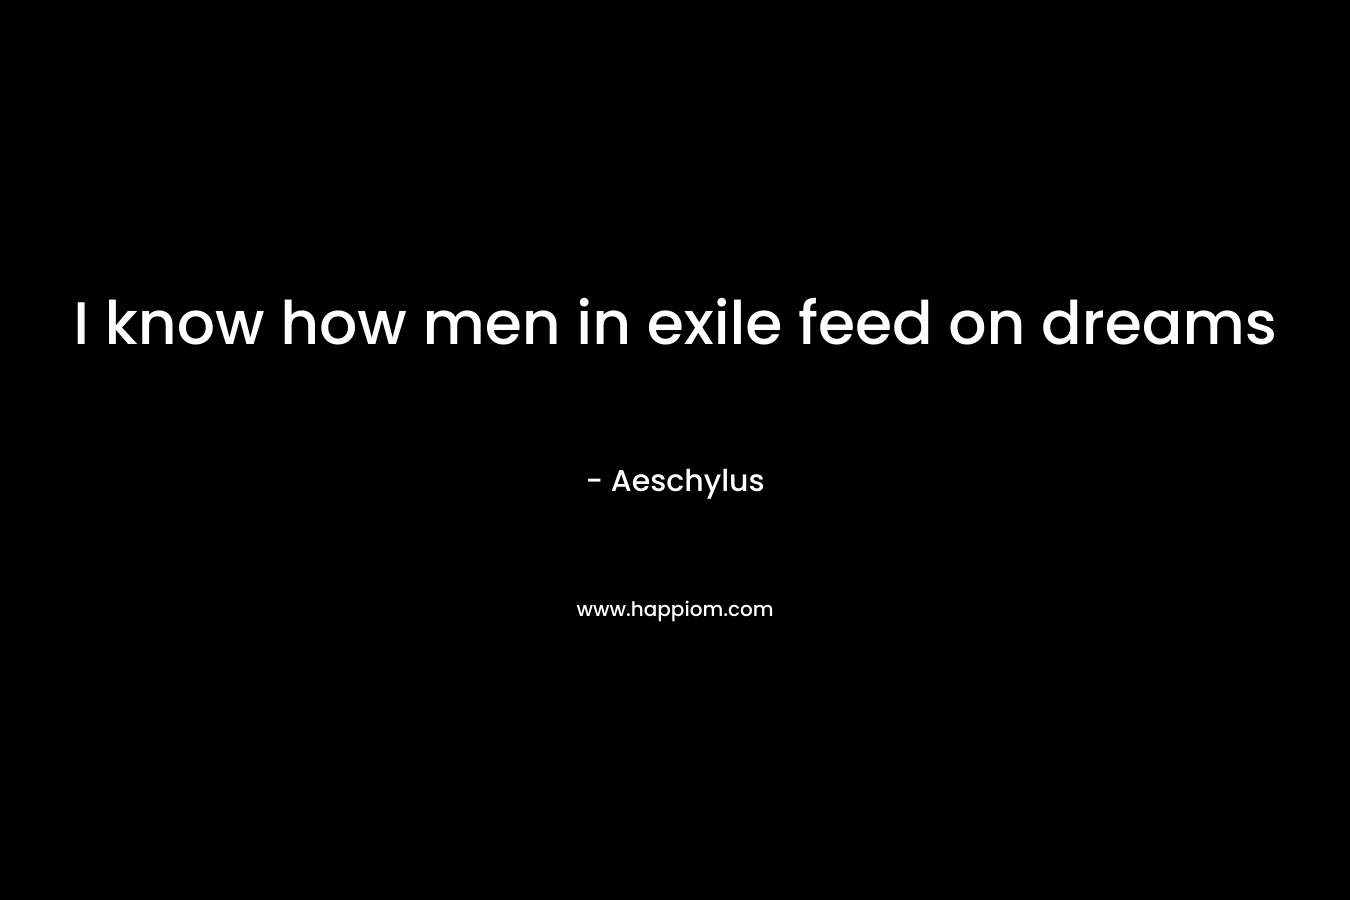 I know how men in exile feed on dreams – Aeschylus